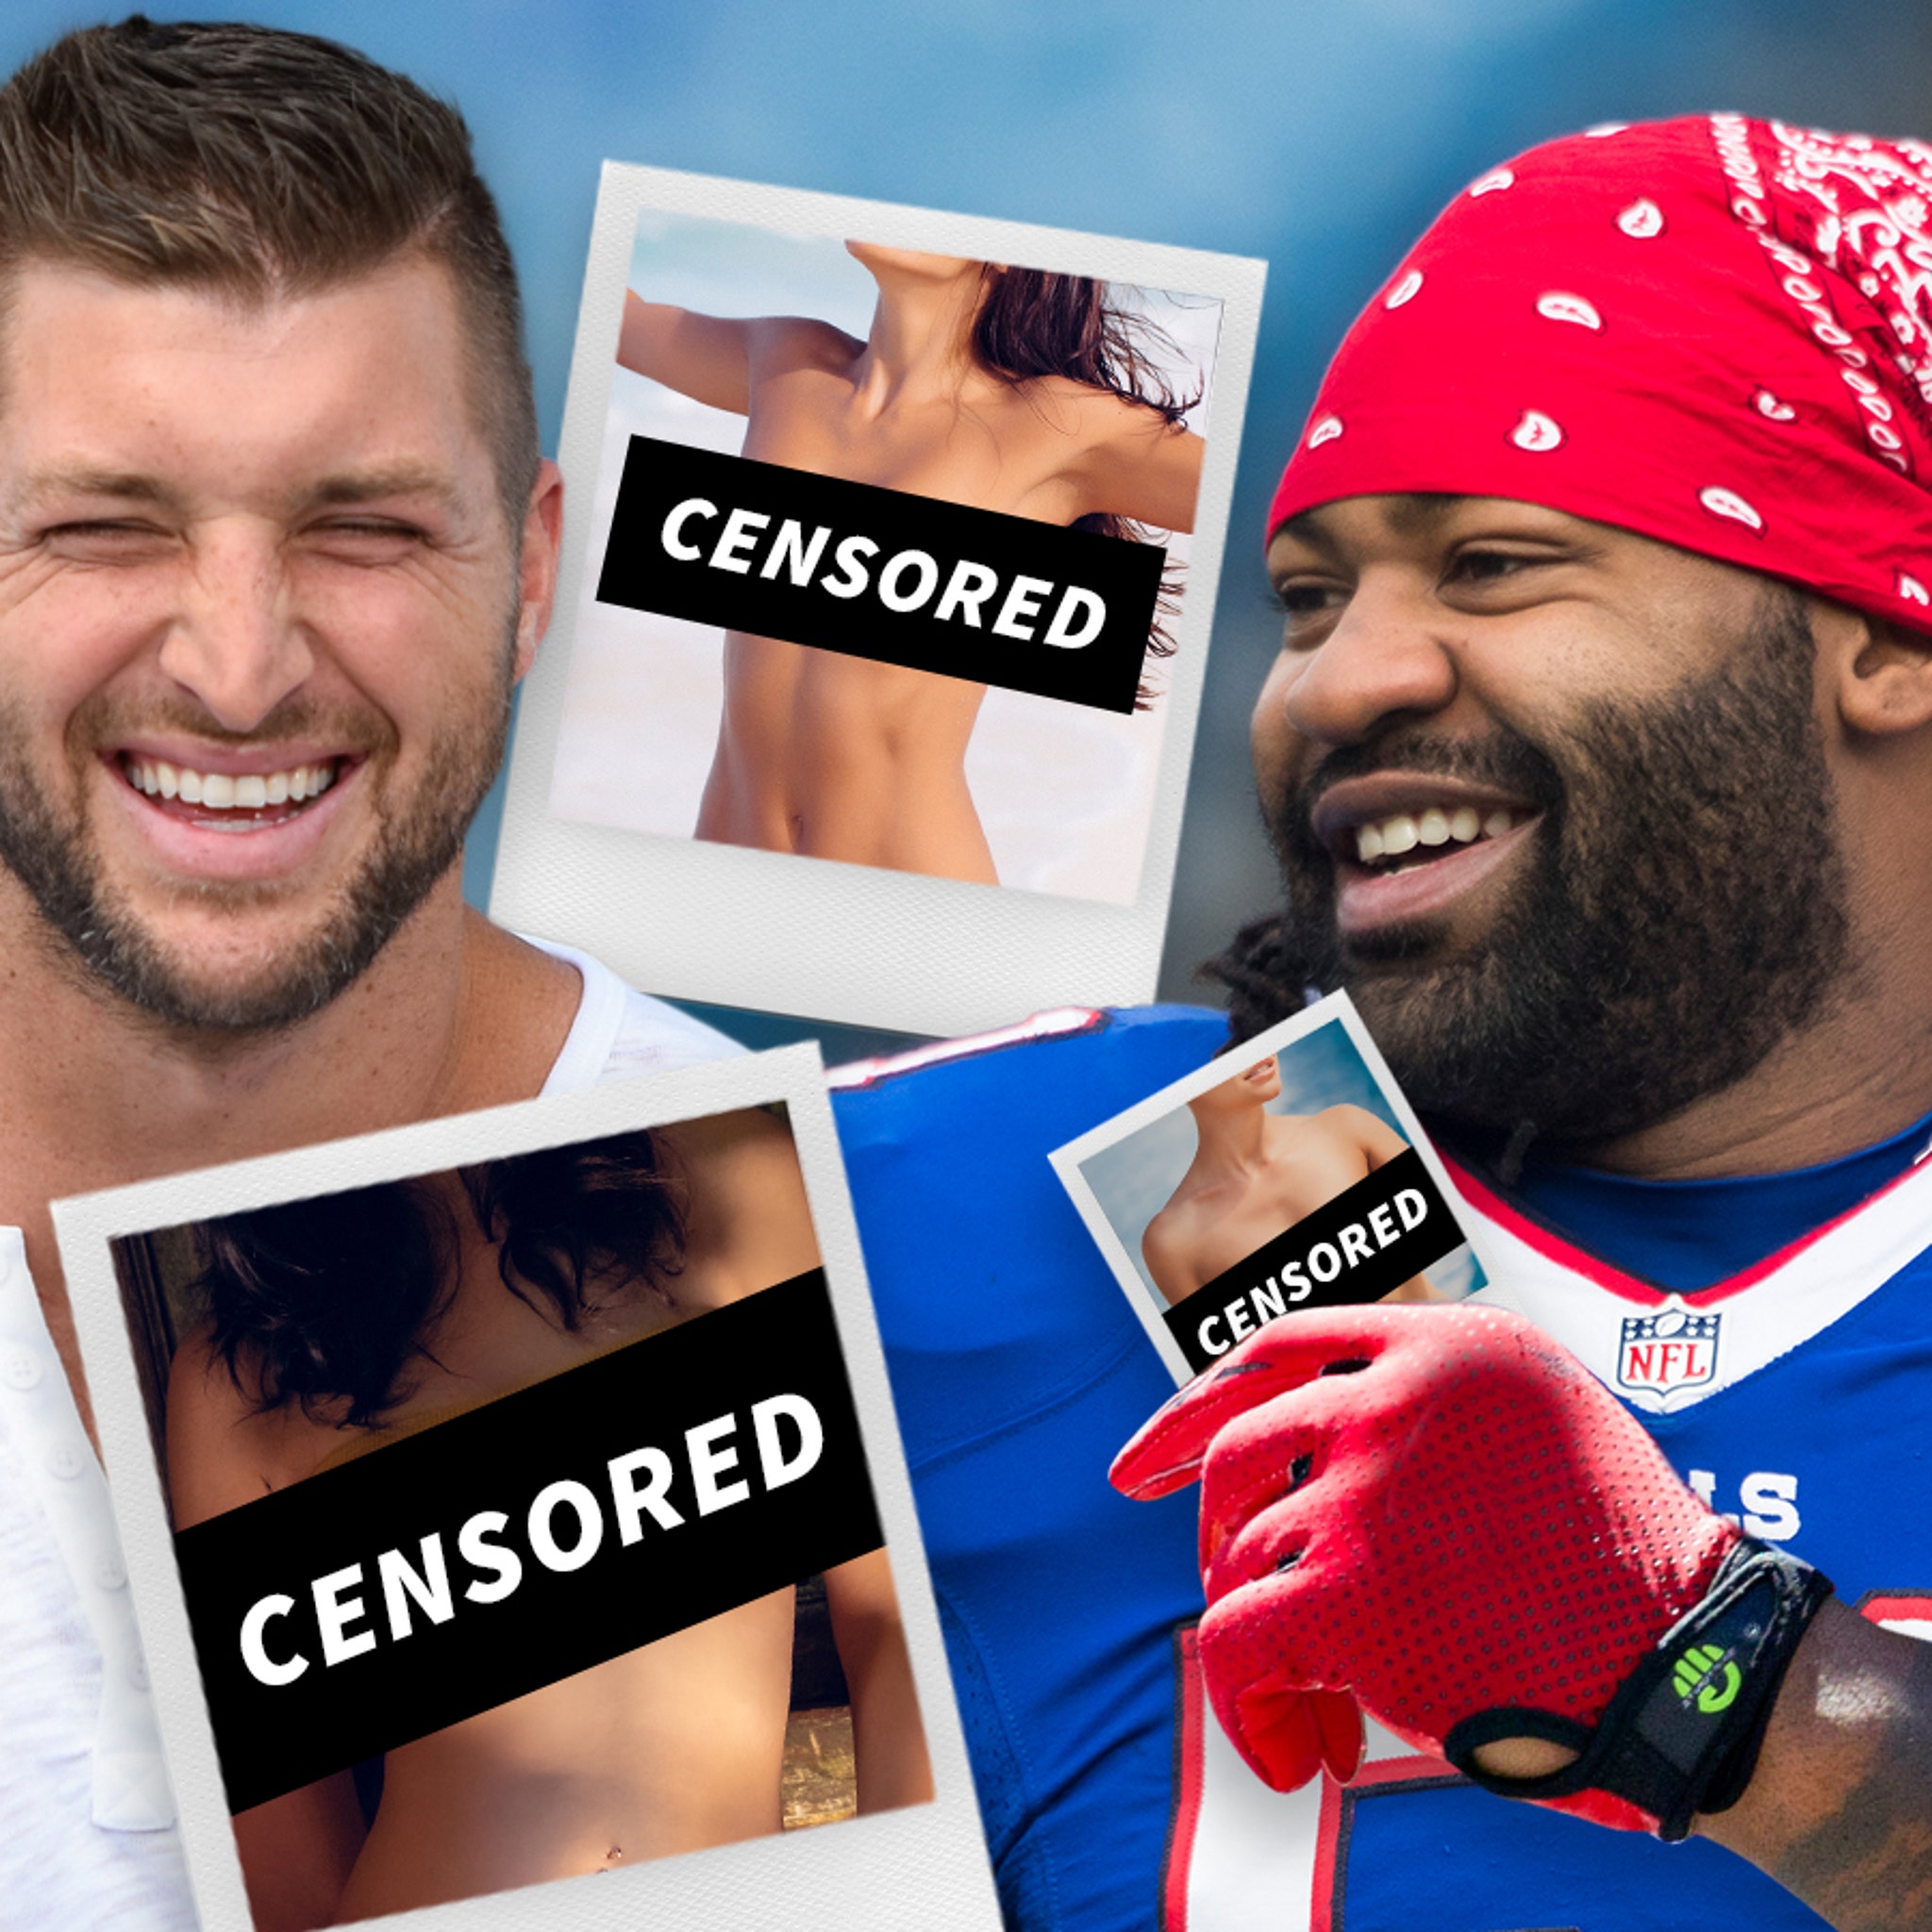 Brandon Spikes Says He Ambushed Tebow W/ Pics Of Nude Women Amid Virginity Claims